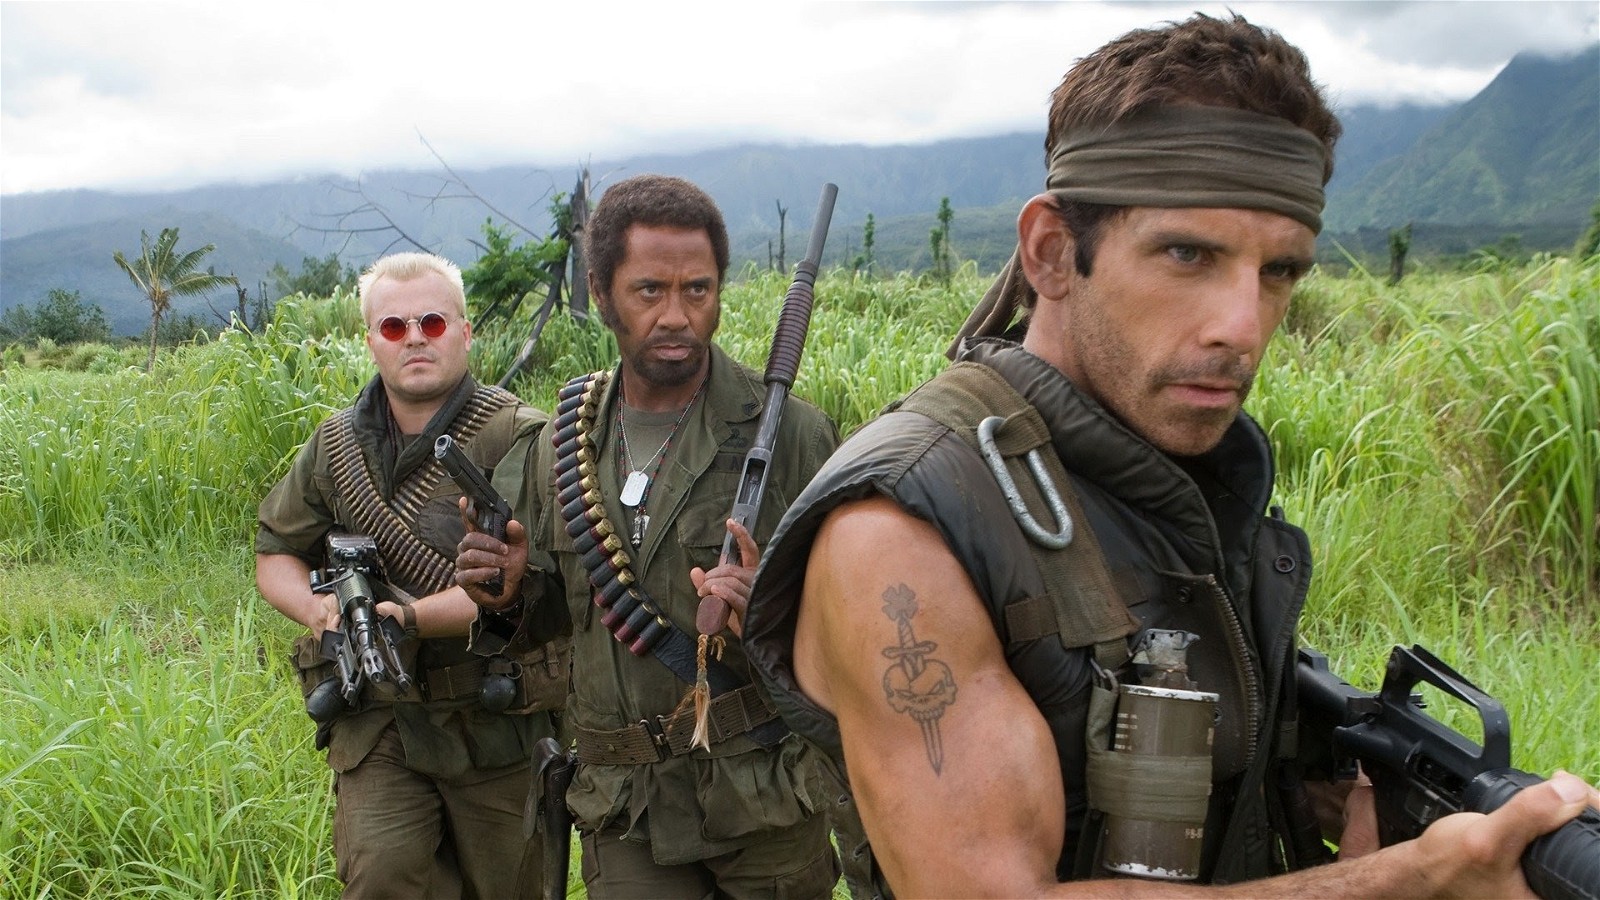 Tropic Thunder director Ben Stiller turned down a script that turned out to be a massive success